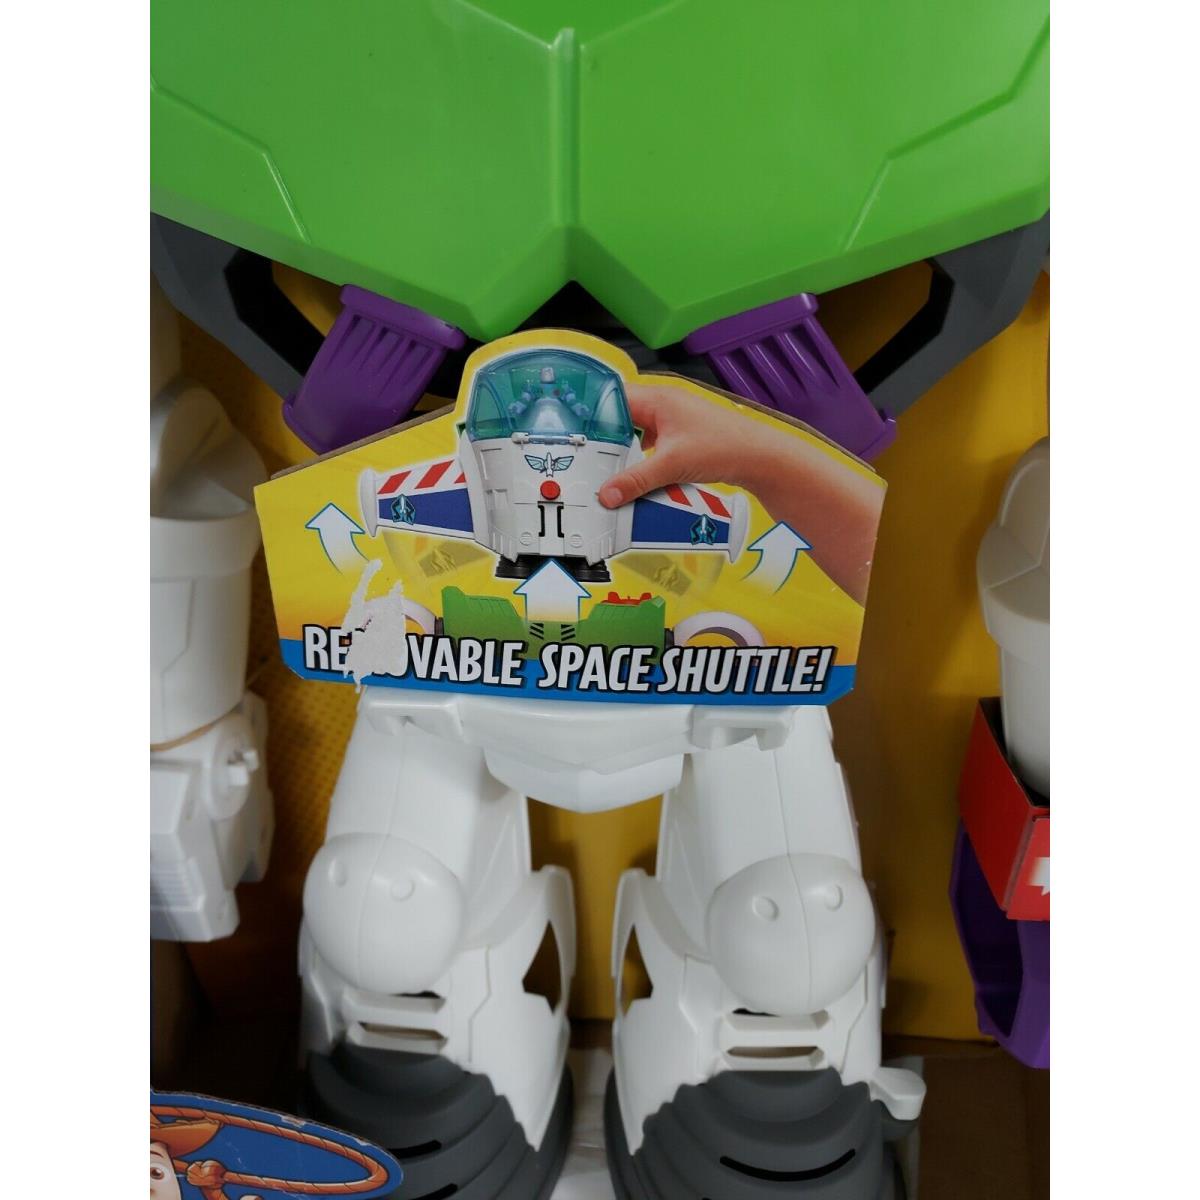 Fisher-price Imaginext Disney Toy Story 4 Buzz Lightyear Robot Space Shuttle 21